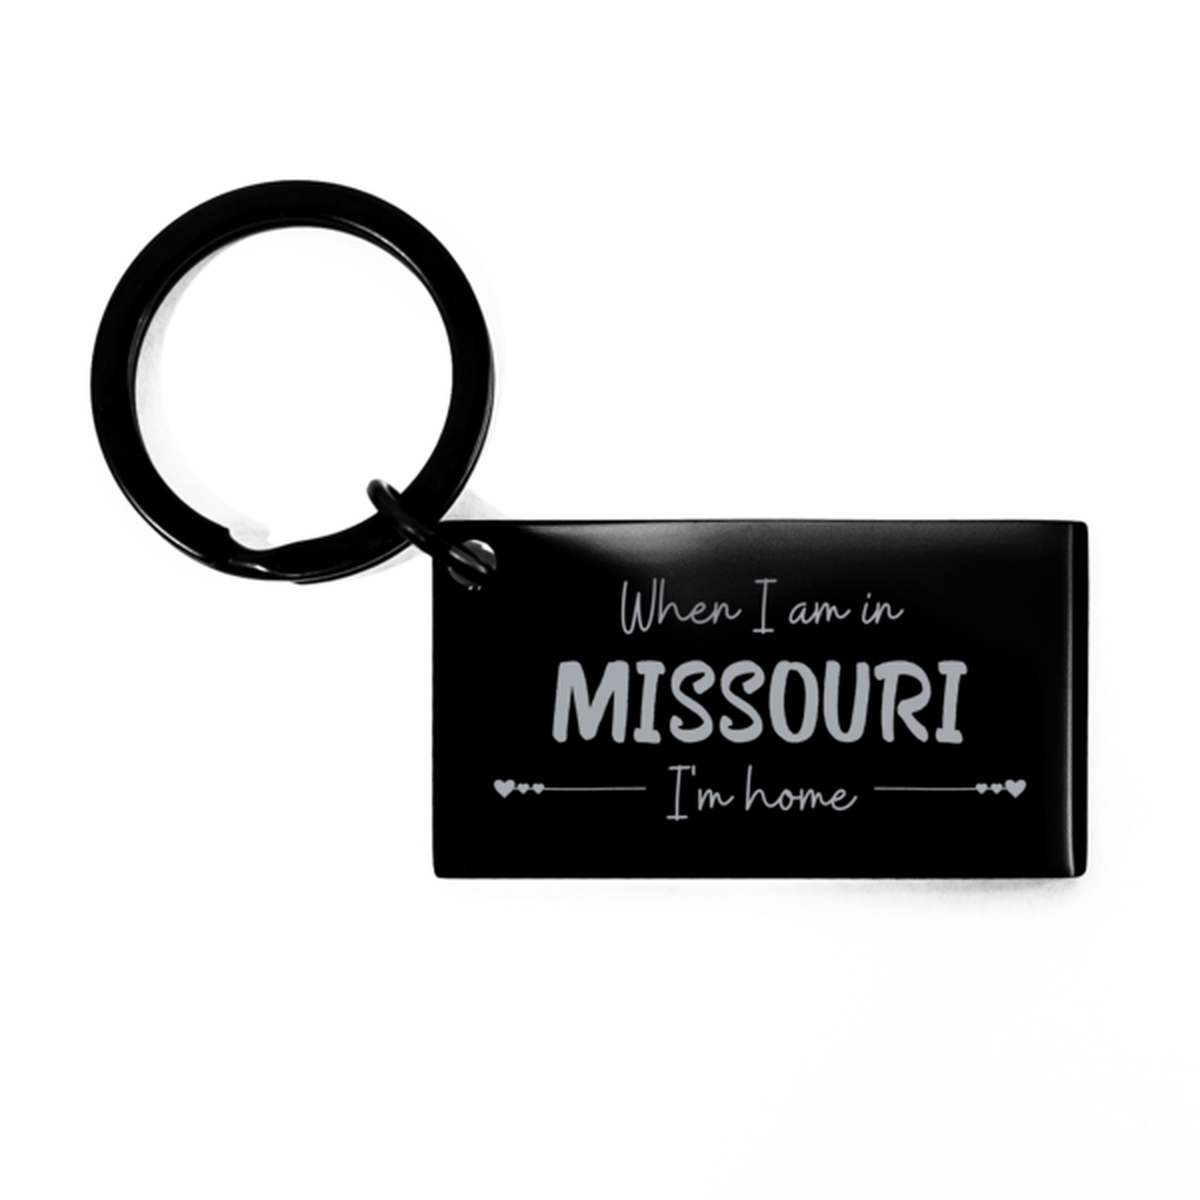 When I am in Missouri I'm home Keychain, Cheap Gifts For Missouri, State Missouri Birthday Gifts for Friends Coworker